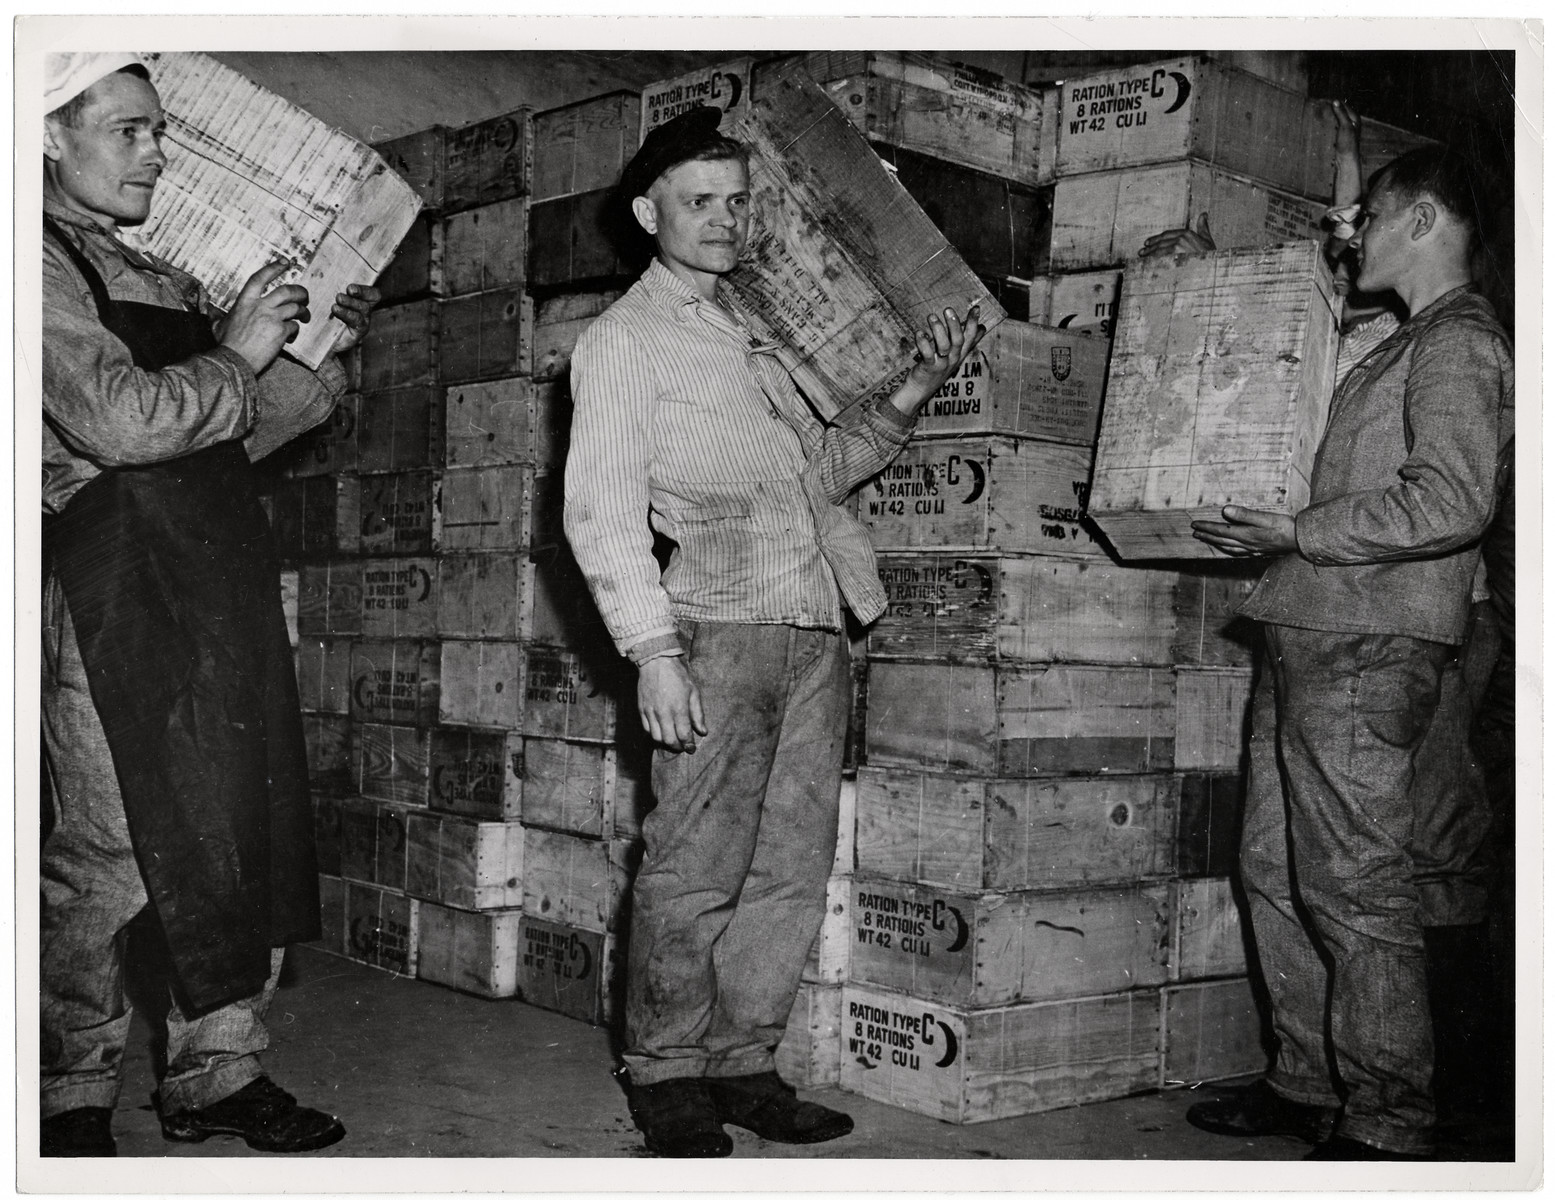 Recently liberated Soviet POWs enjoy American food rations.

Original Caption: "Russian prisoners of war liberated in Hemer, Germany, by the Ninth US Army celebrated May Day, 1945 by holding a banquet of 'C' rations. Infantrymen of the 75th Infantry Division are shown handing out boxes of the rations for the banquet. There were 22,000 Russians in the Hemer camp, 9,000 of them hosptial cases suffering from tuberculosis, dysentery, typhus and malnutrition."